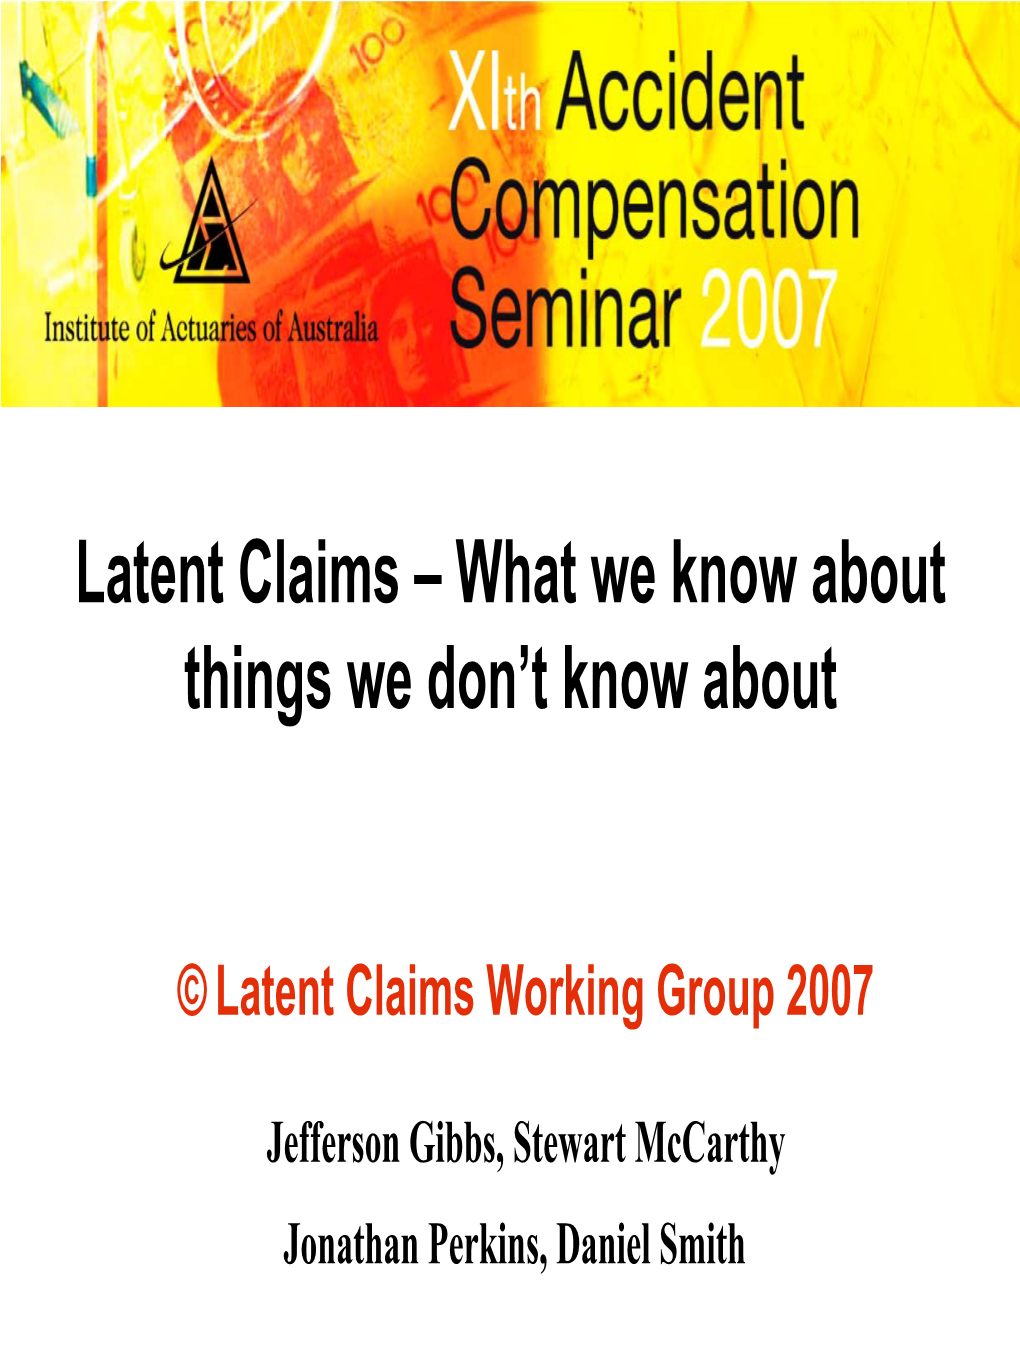 Latent Claims – What We Know About Things We Don't Know About